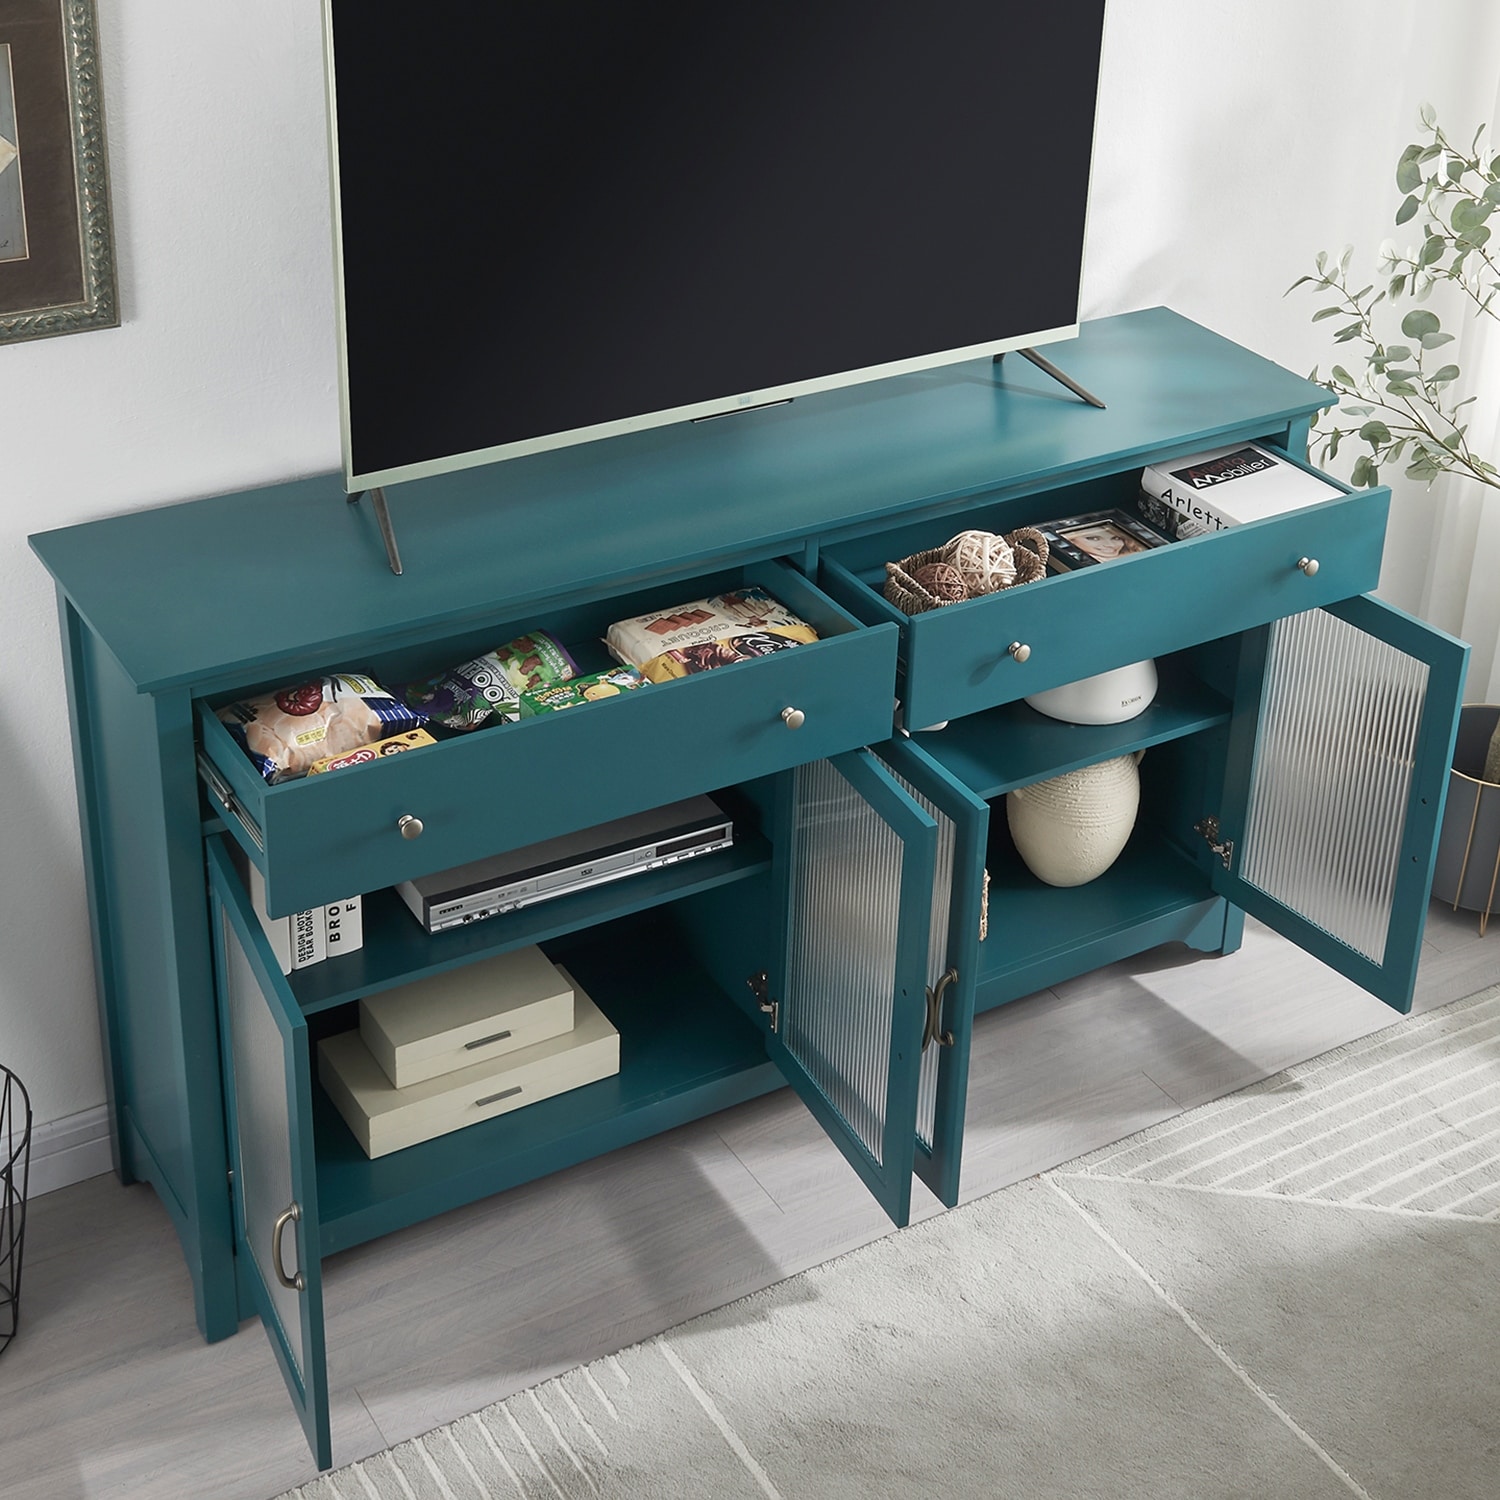 62 TV Stand, Storage Buffet Cabinet, Sideboard - Teal Blue